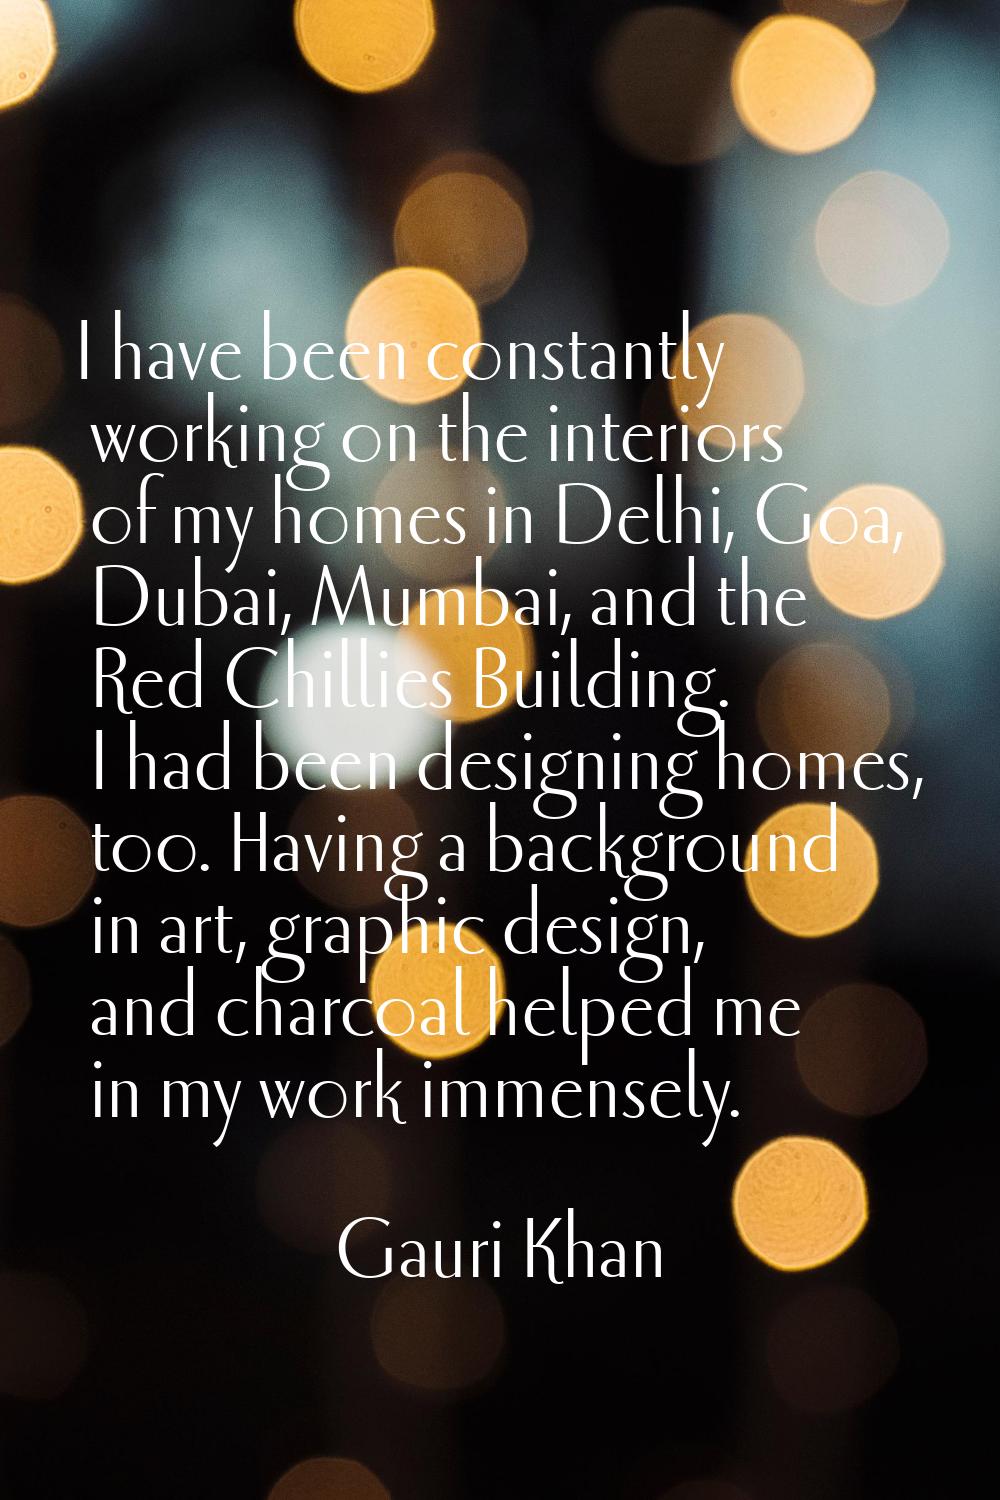 I have been constantly working on the interiors of my homes in Delhi, Goa, Dubai, Mumbai, and the R